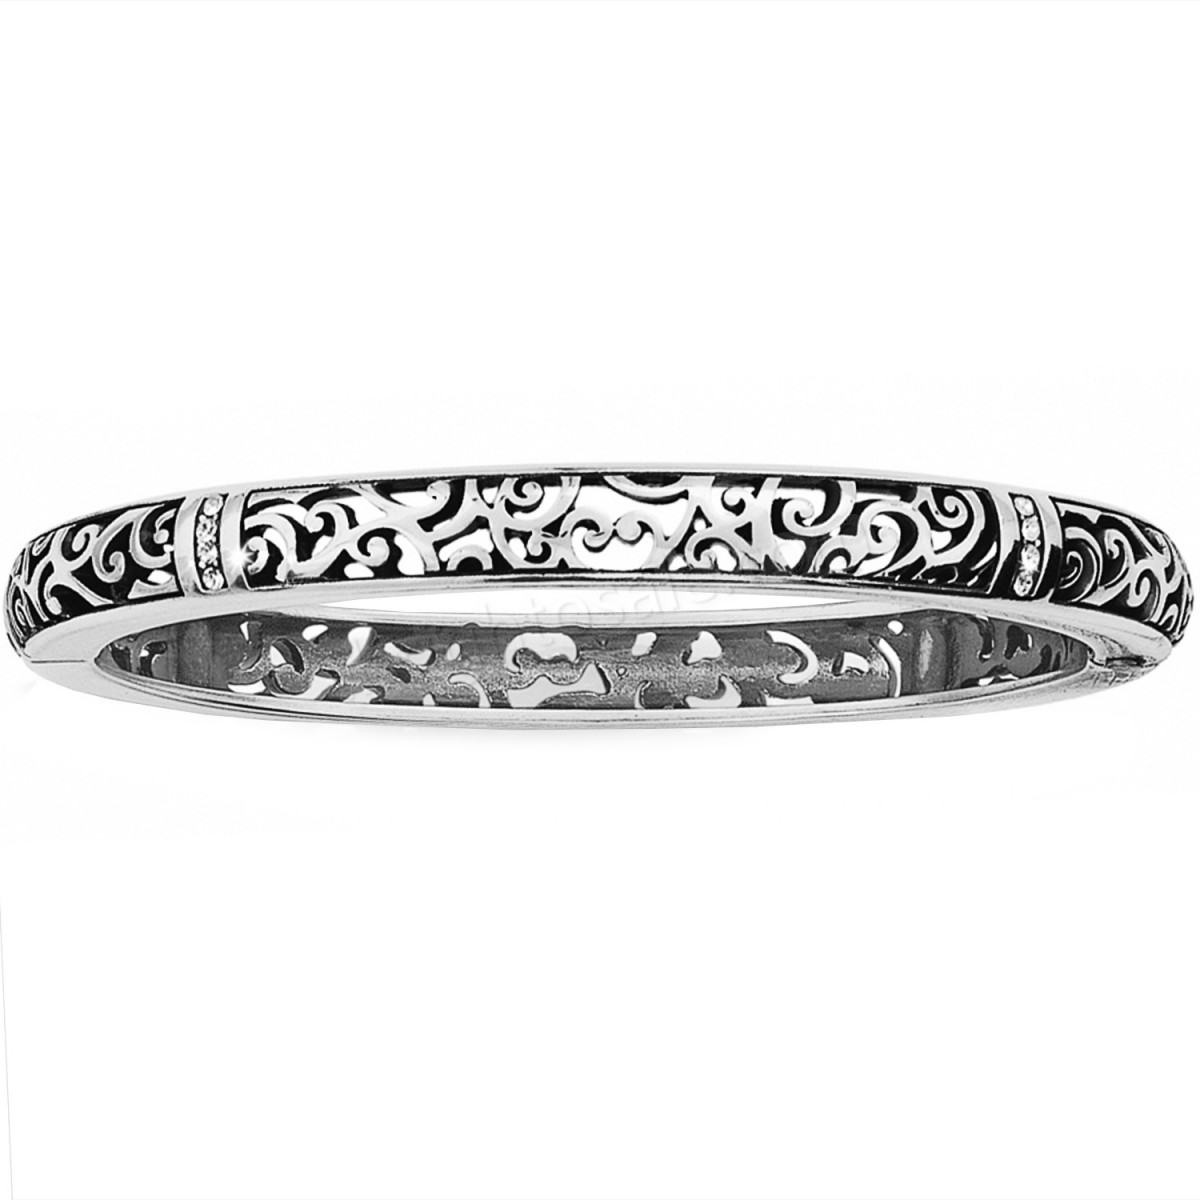 Brighton Collectibles & Online Discount Viewpoint Hinged Bangle - -0